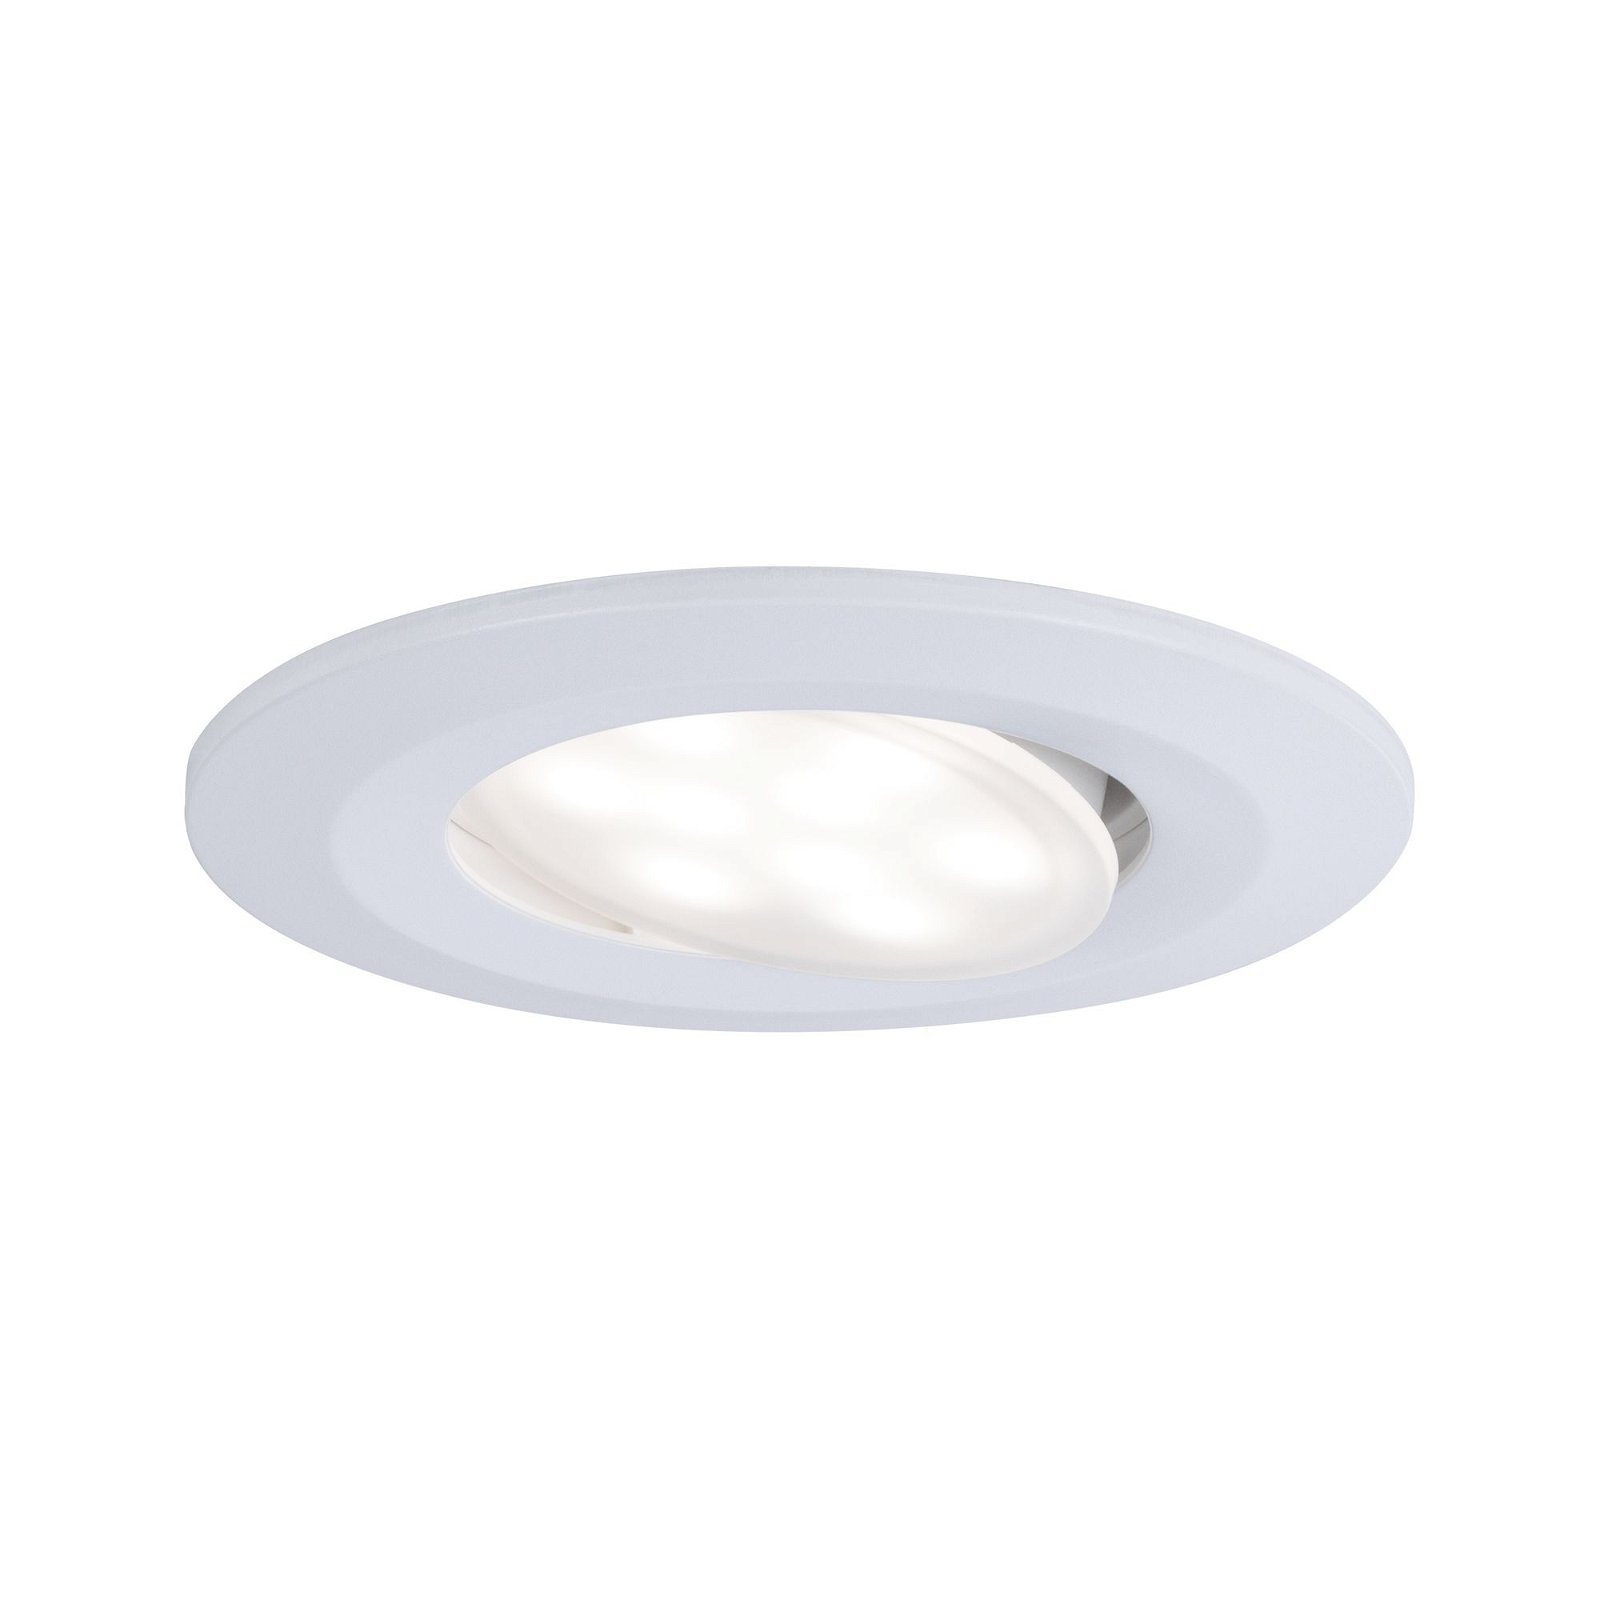 LED Recessed luminaire Calla 3-piece set Swivelling IP65 round 90mm 30° 5,5W 400lm 230V White Switch White